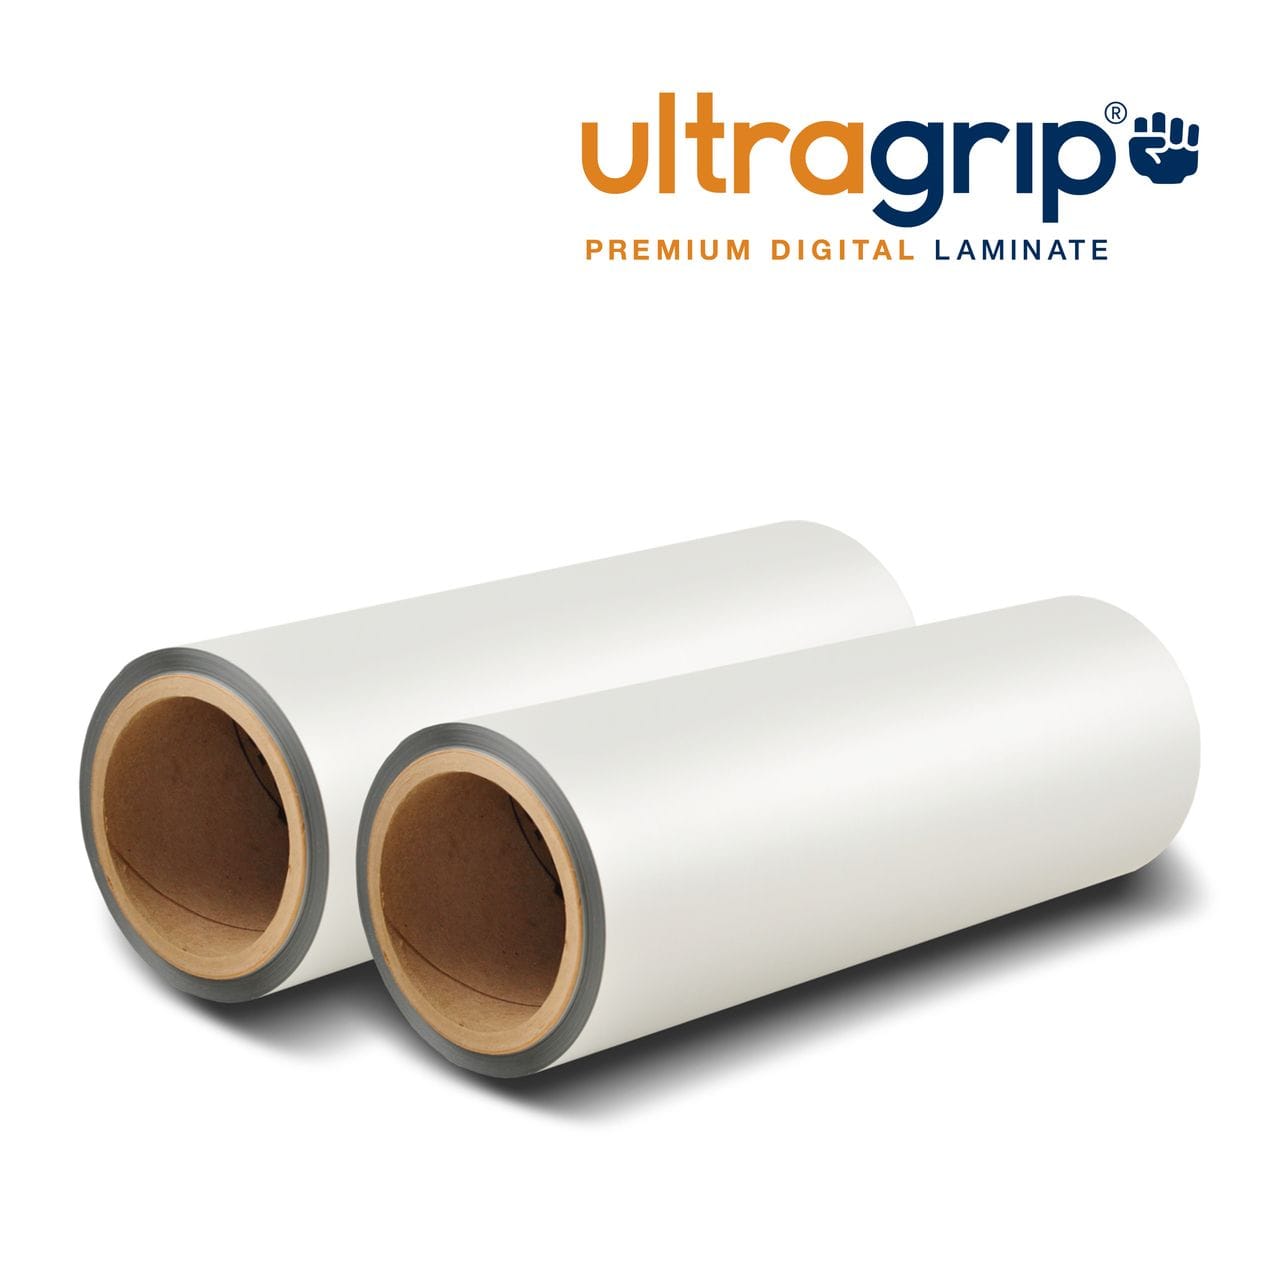 Ultragrip Gloss 1" Core ( ROLL PRICE, MUST PURCHASE 2)